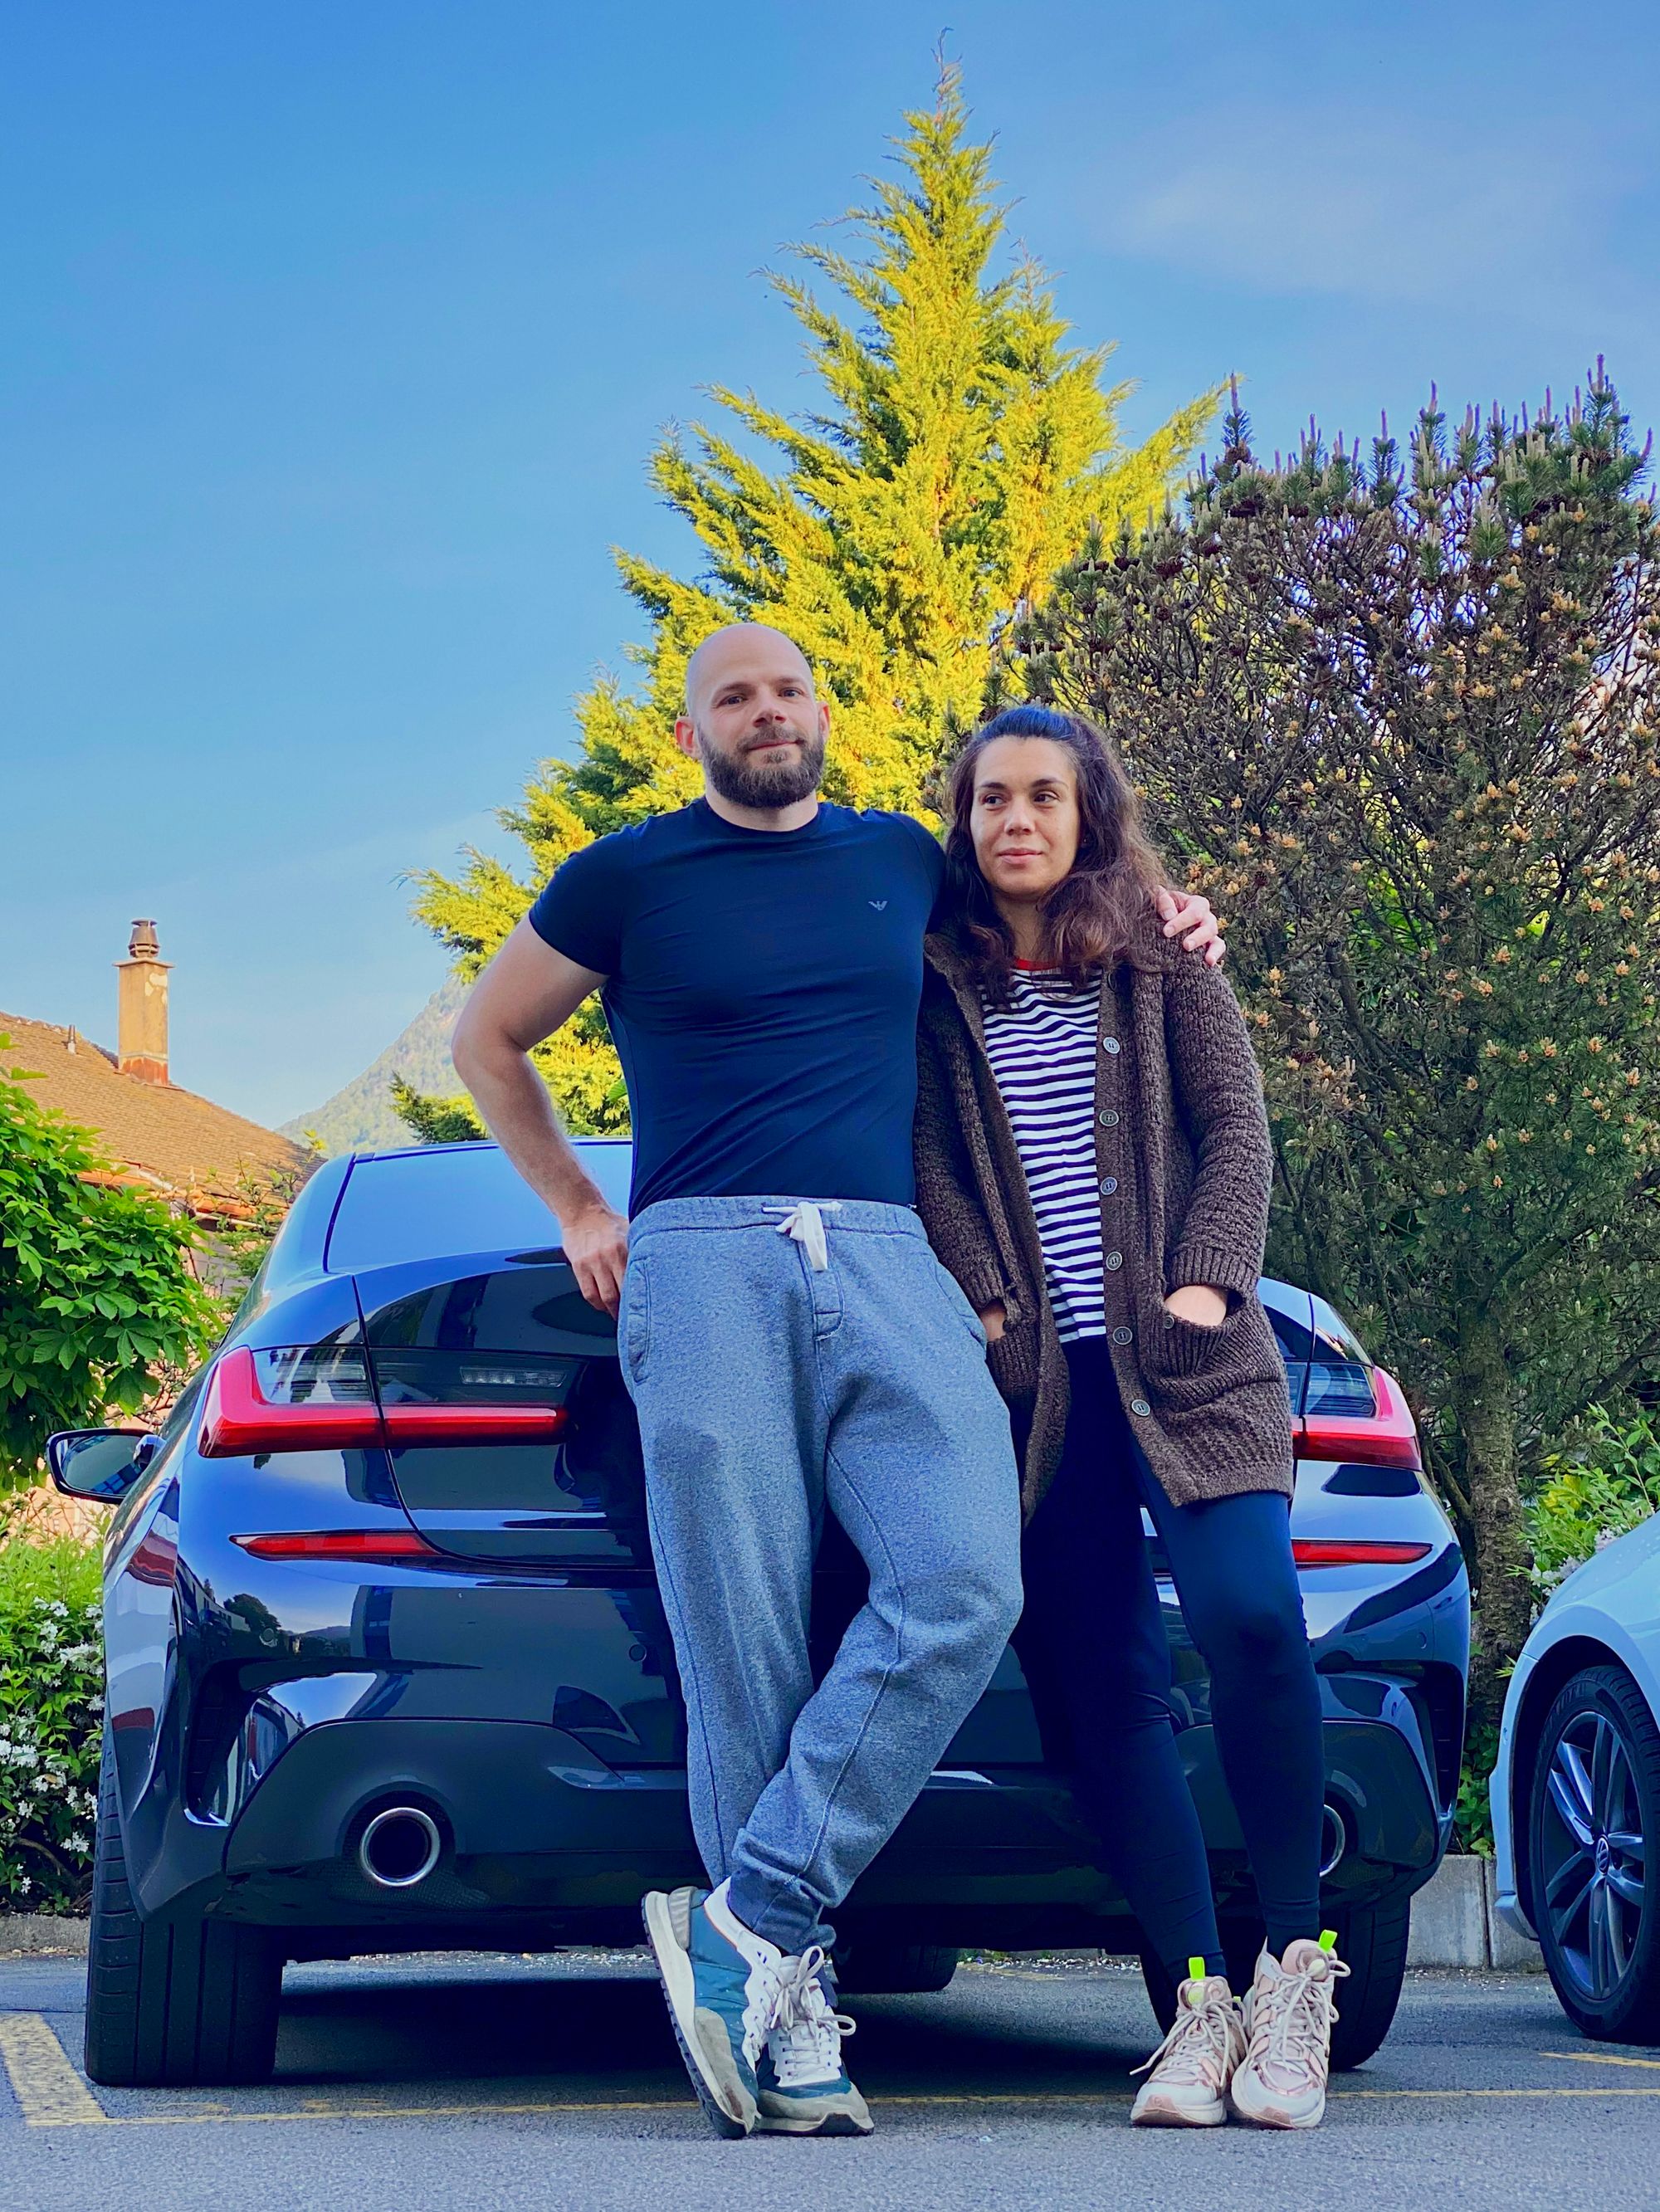 Me and my wife next to our car, ready for the next adventure